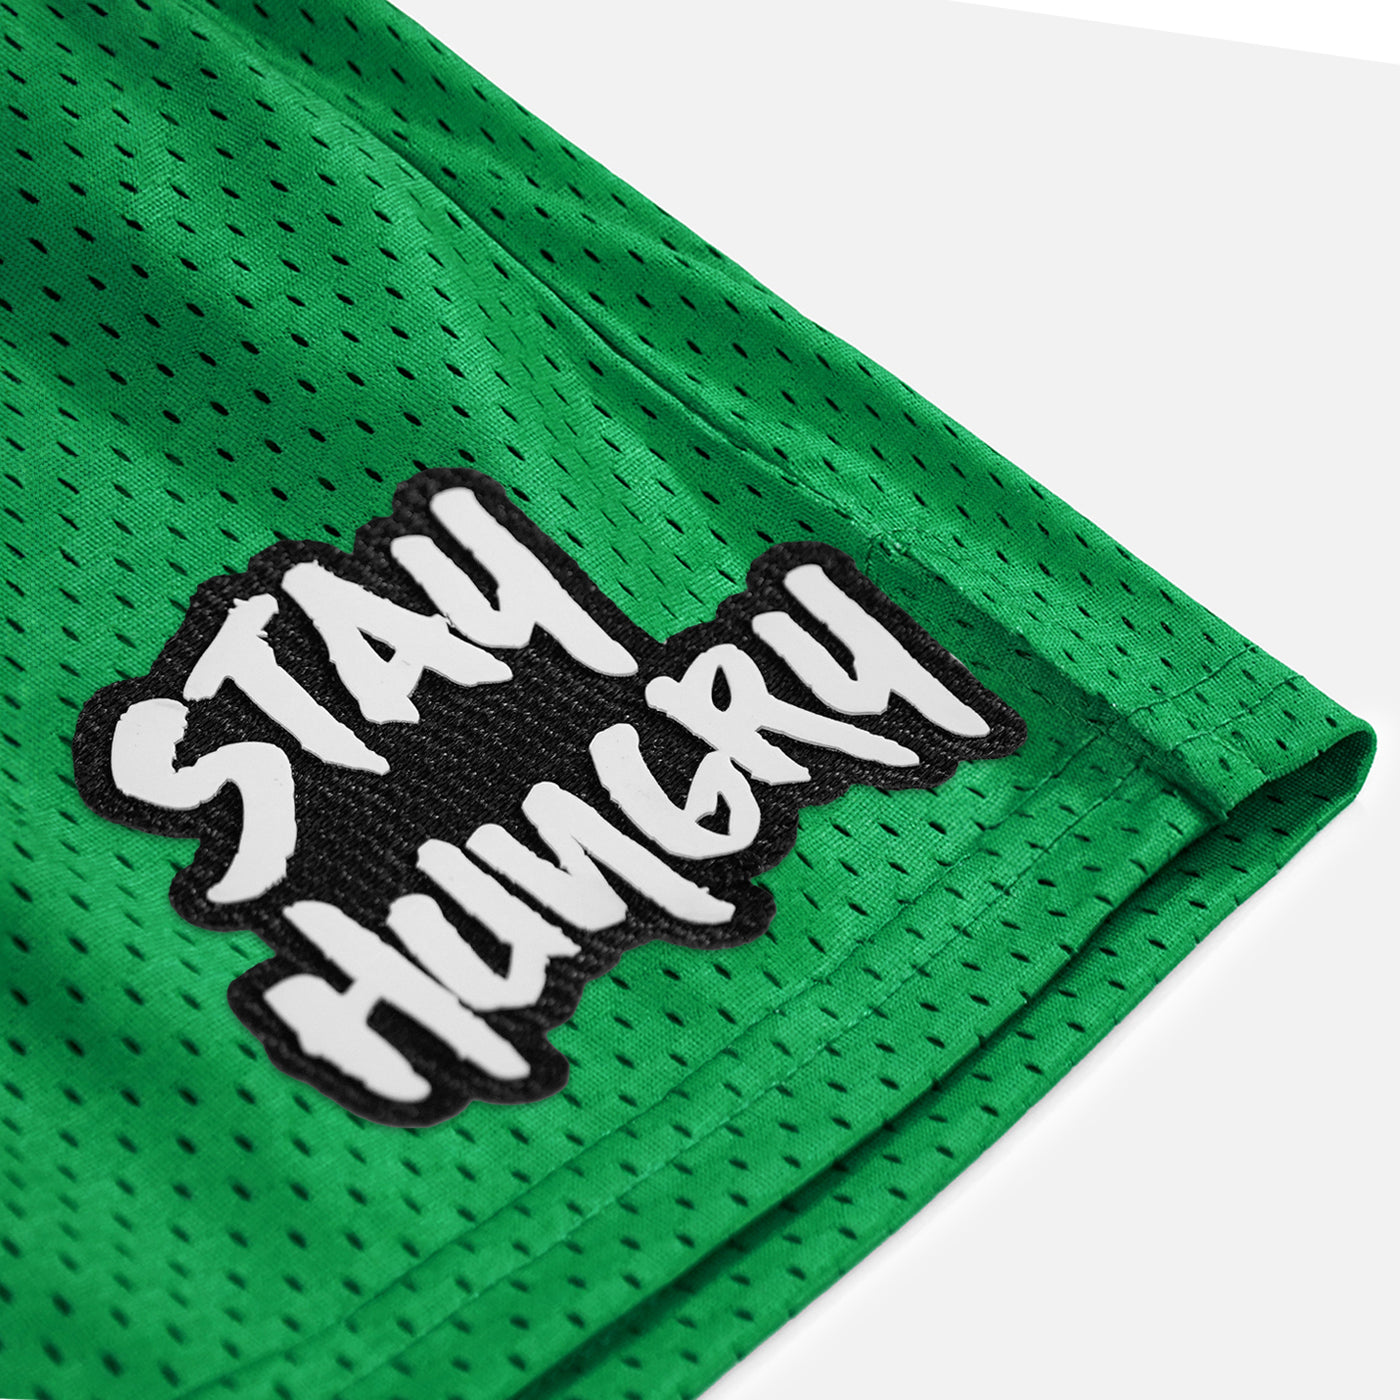 Stay Hungry Patch Shorts - 7"